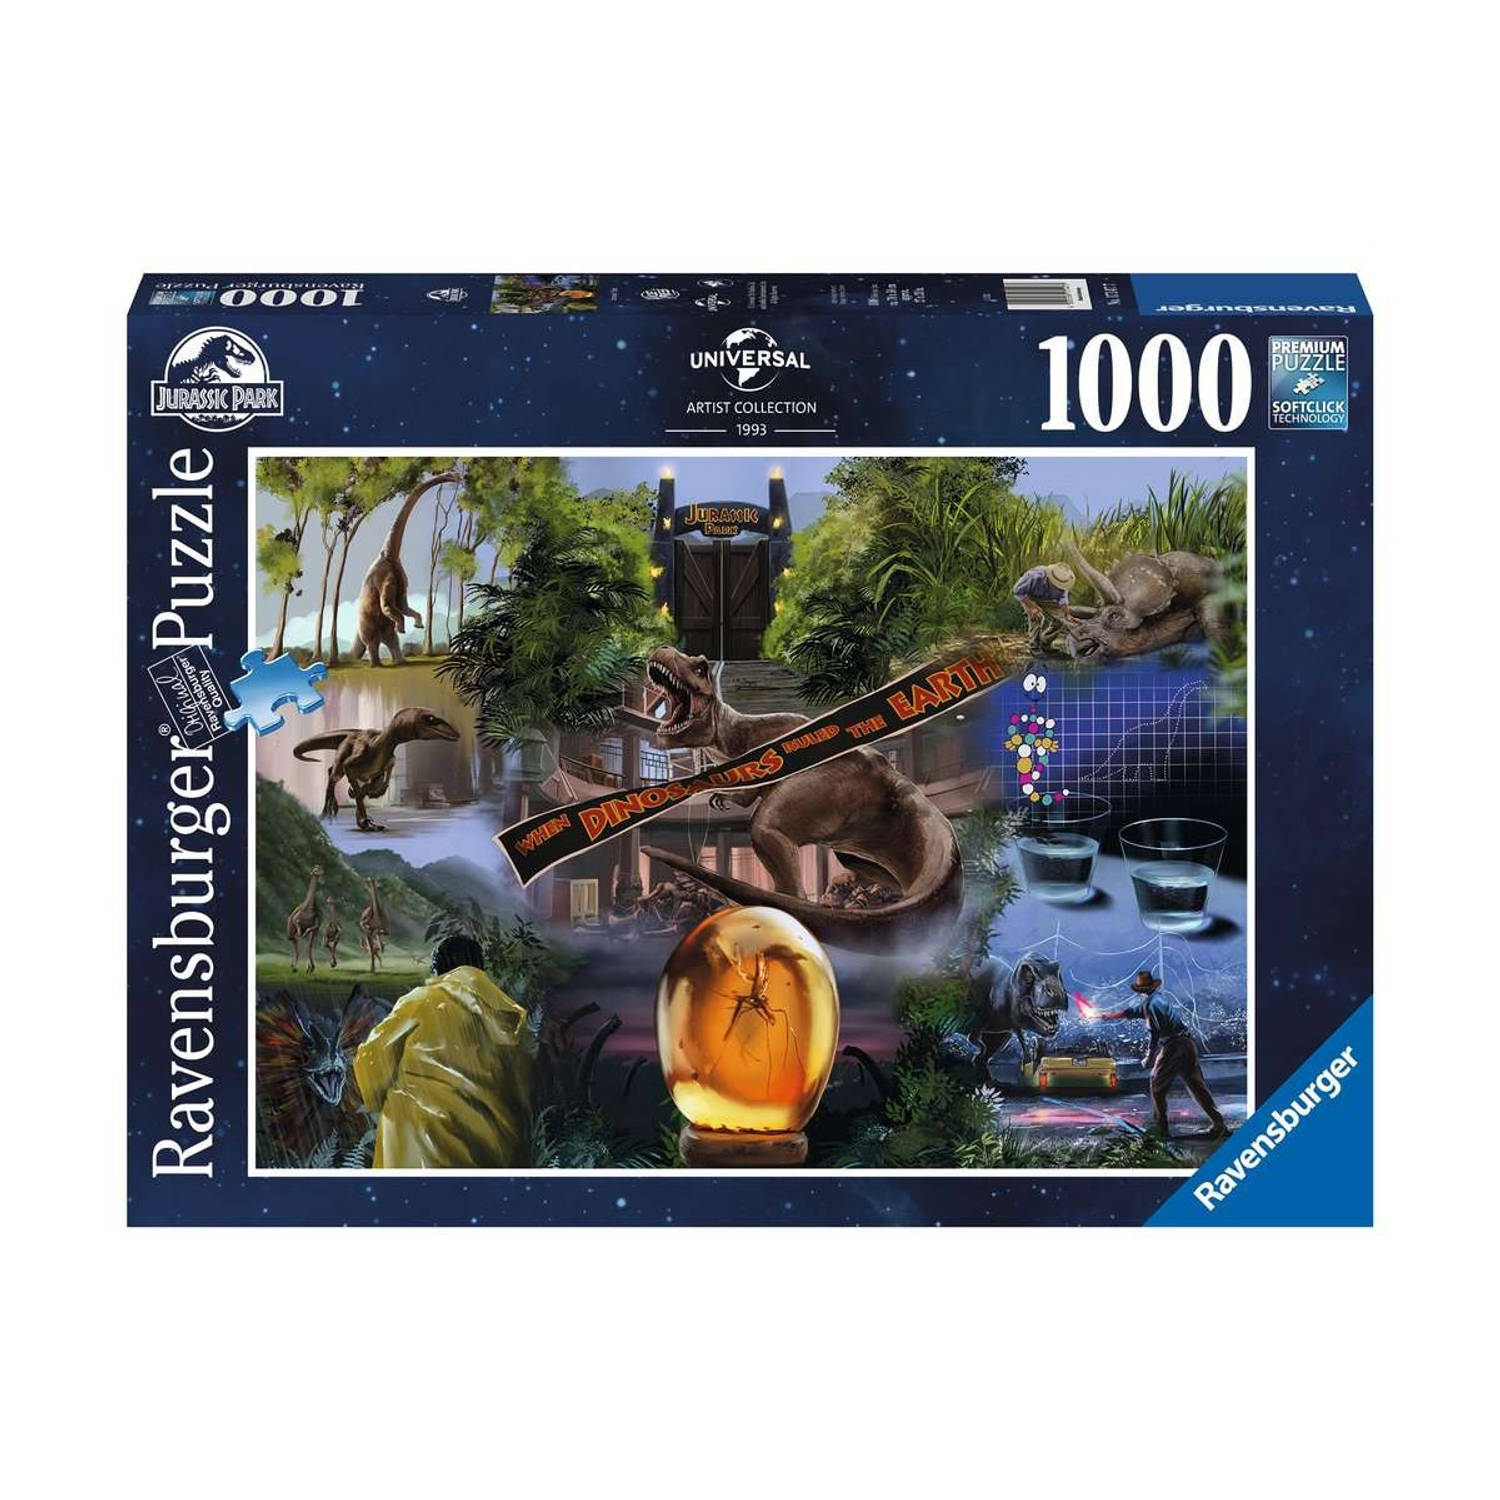 Universal Artist Collection Puzzle Jurassic Park Jigsaw (1000 pieces)